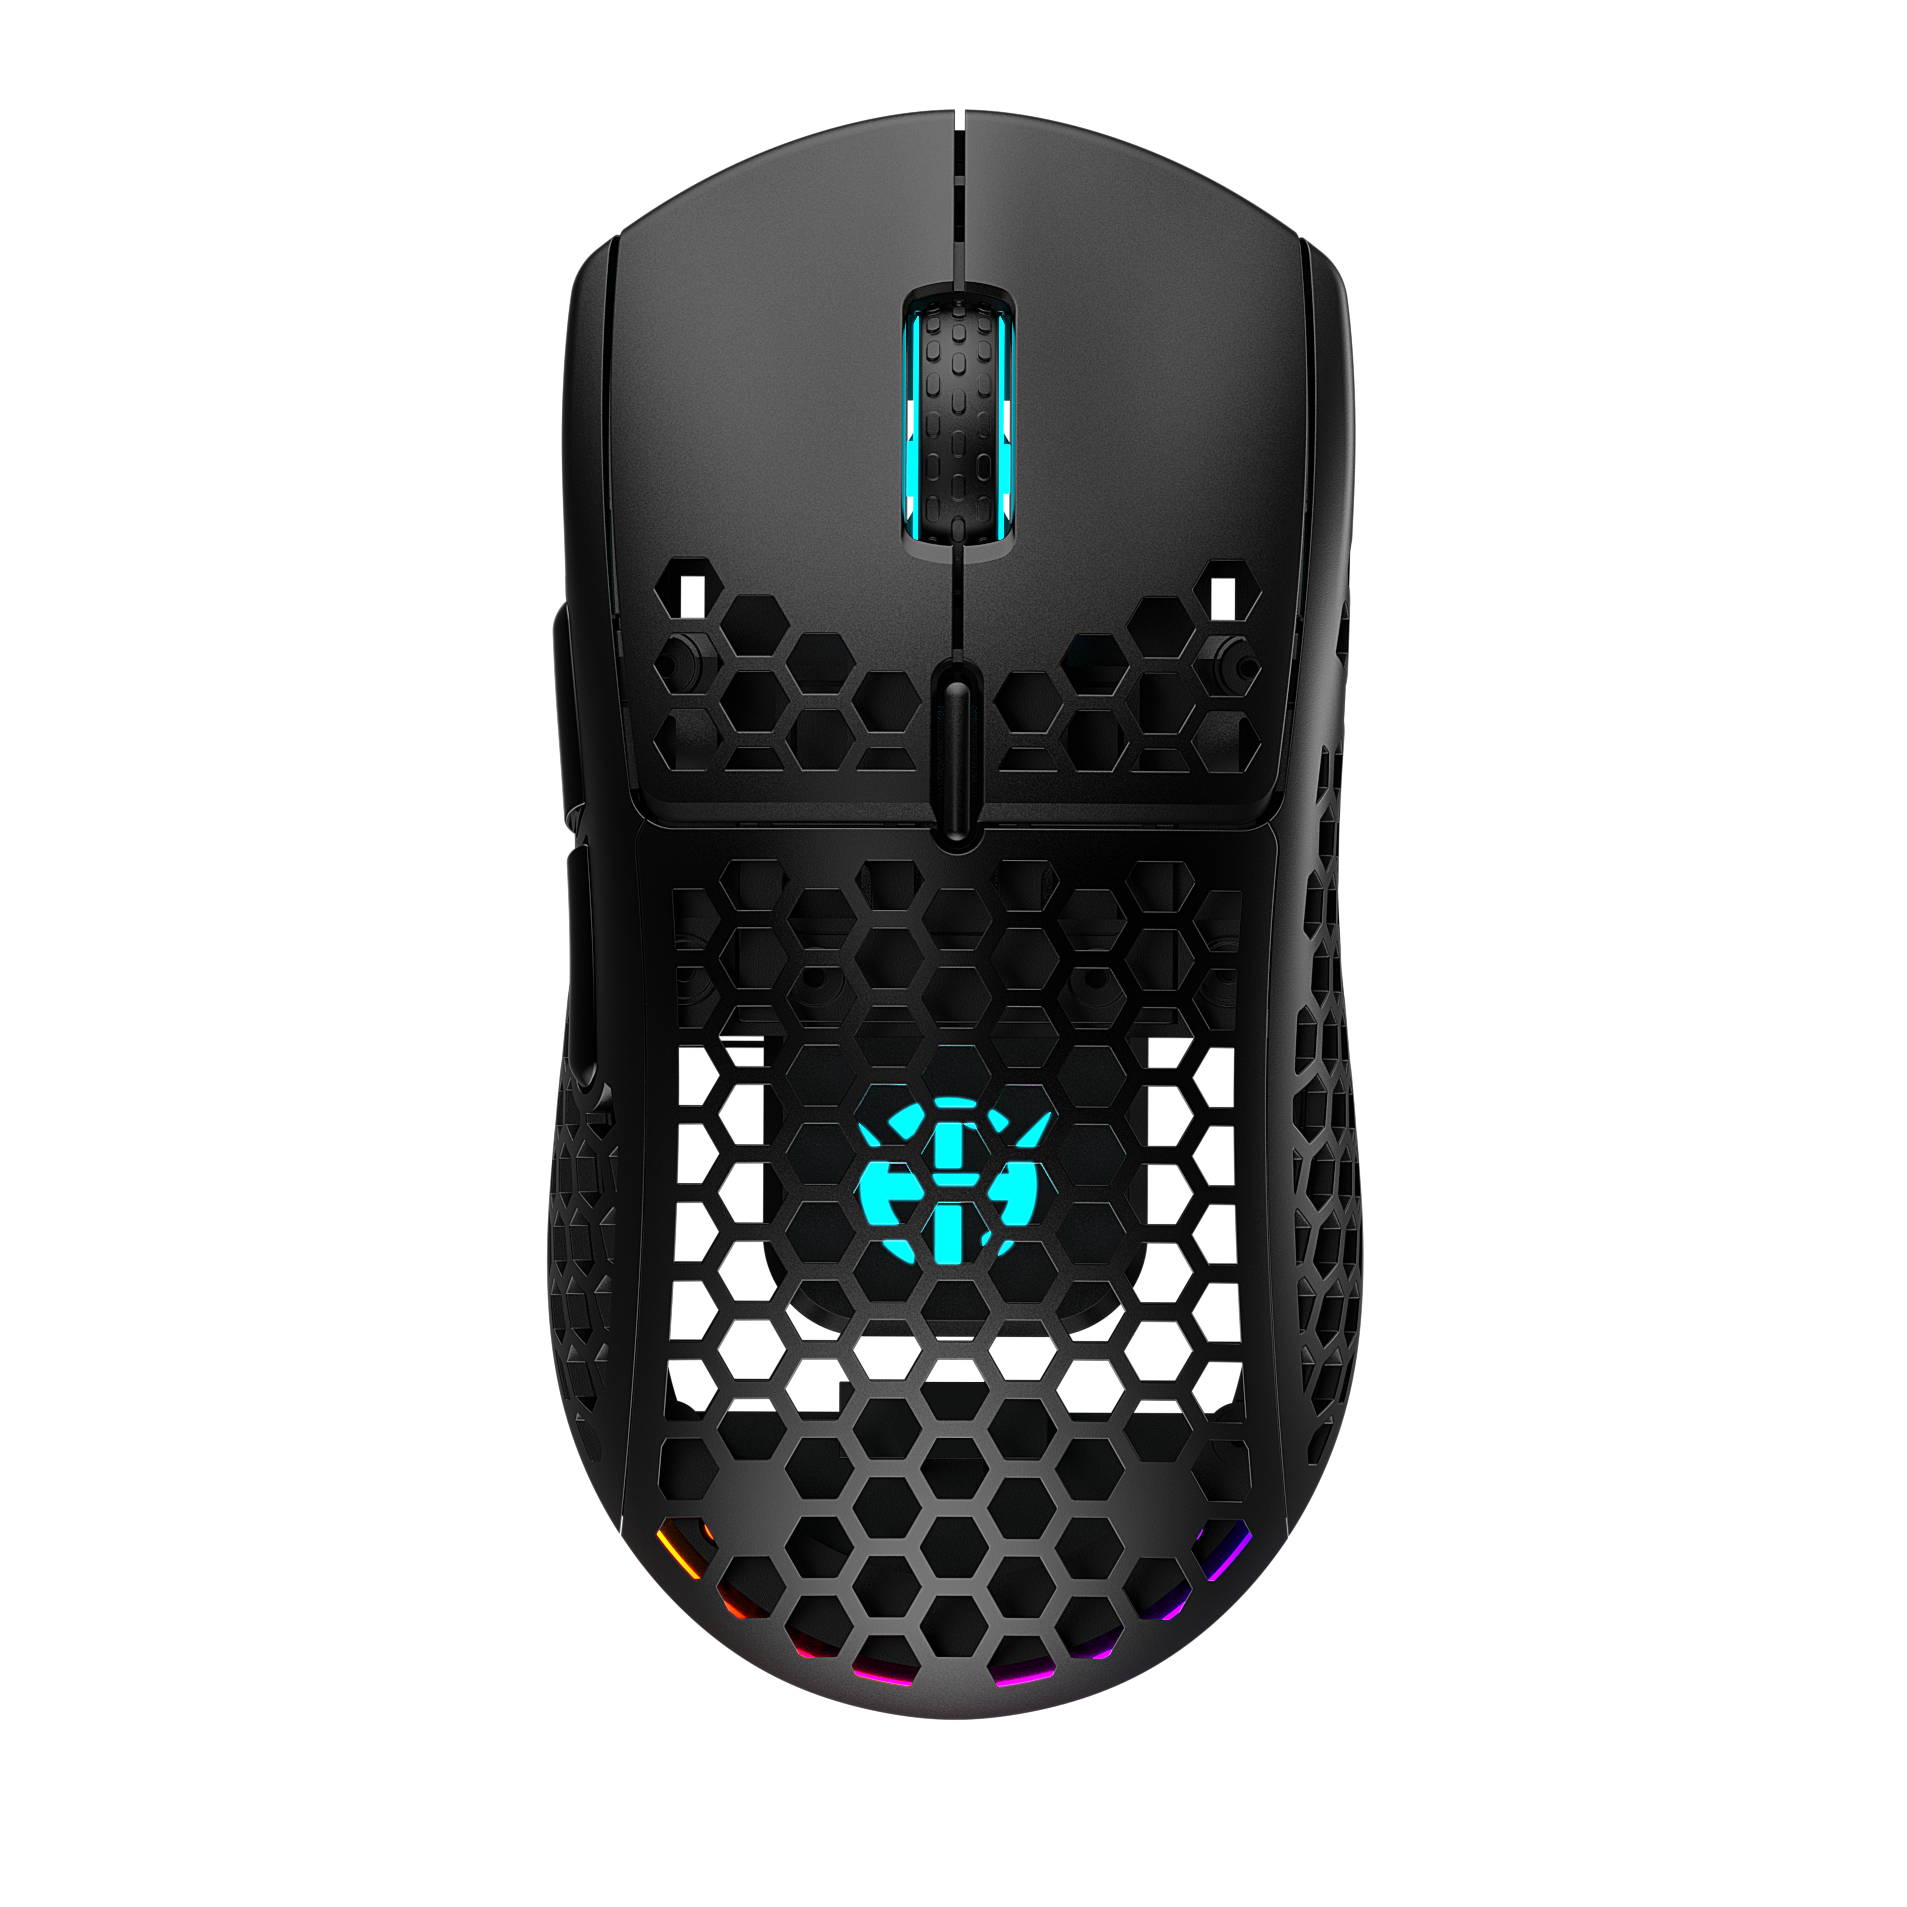 Light-weight gaming mouse